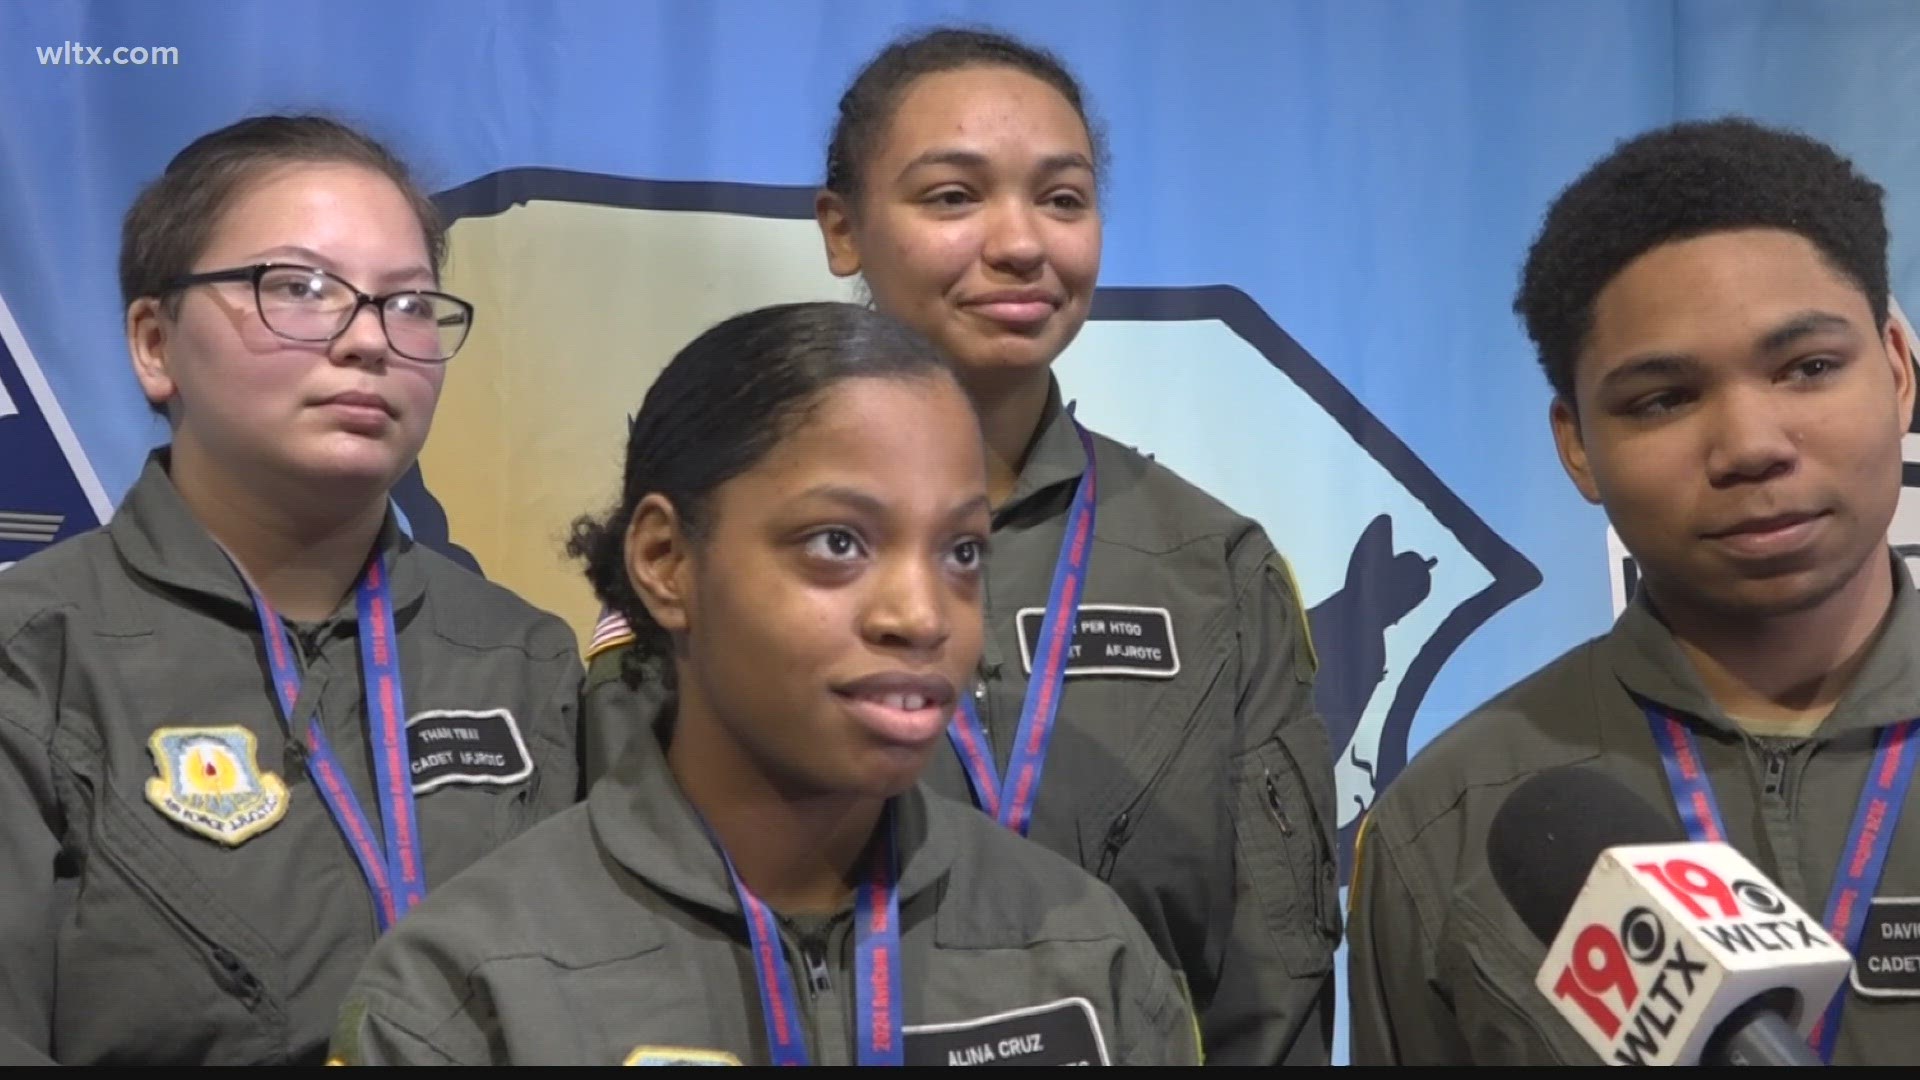 AT the Challenger Learning Center students were able to compete in the aviation competition or AVICOM.